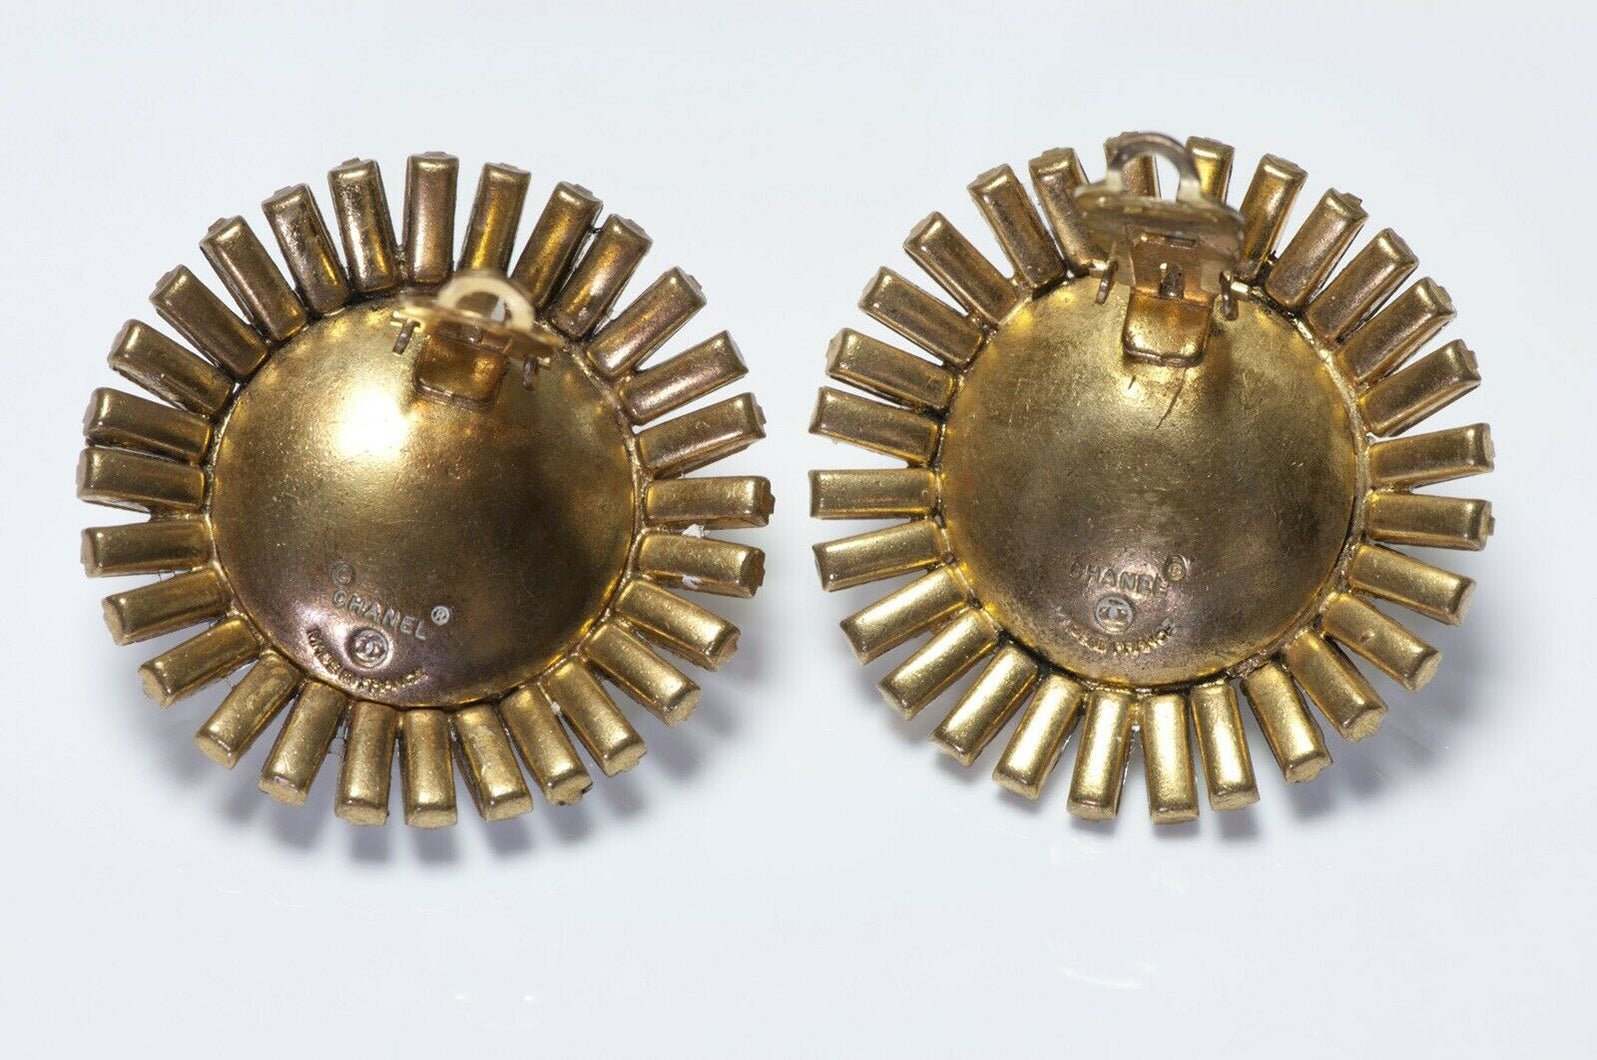 CHANEL Paris 1970’s Brown Pearl Crystal Large Round Earrings - DSF Antique Jewelry